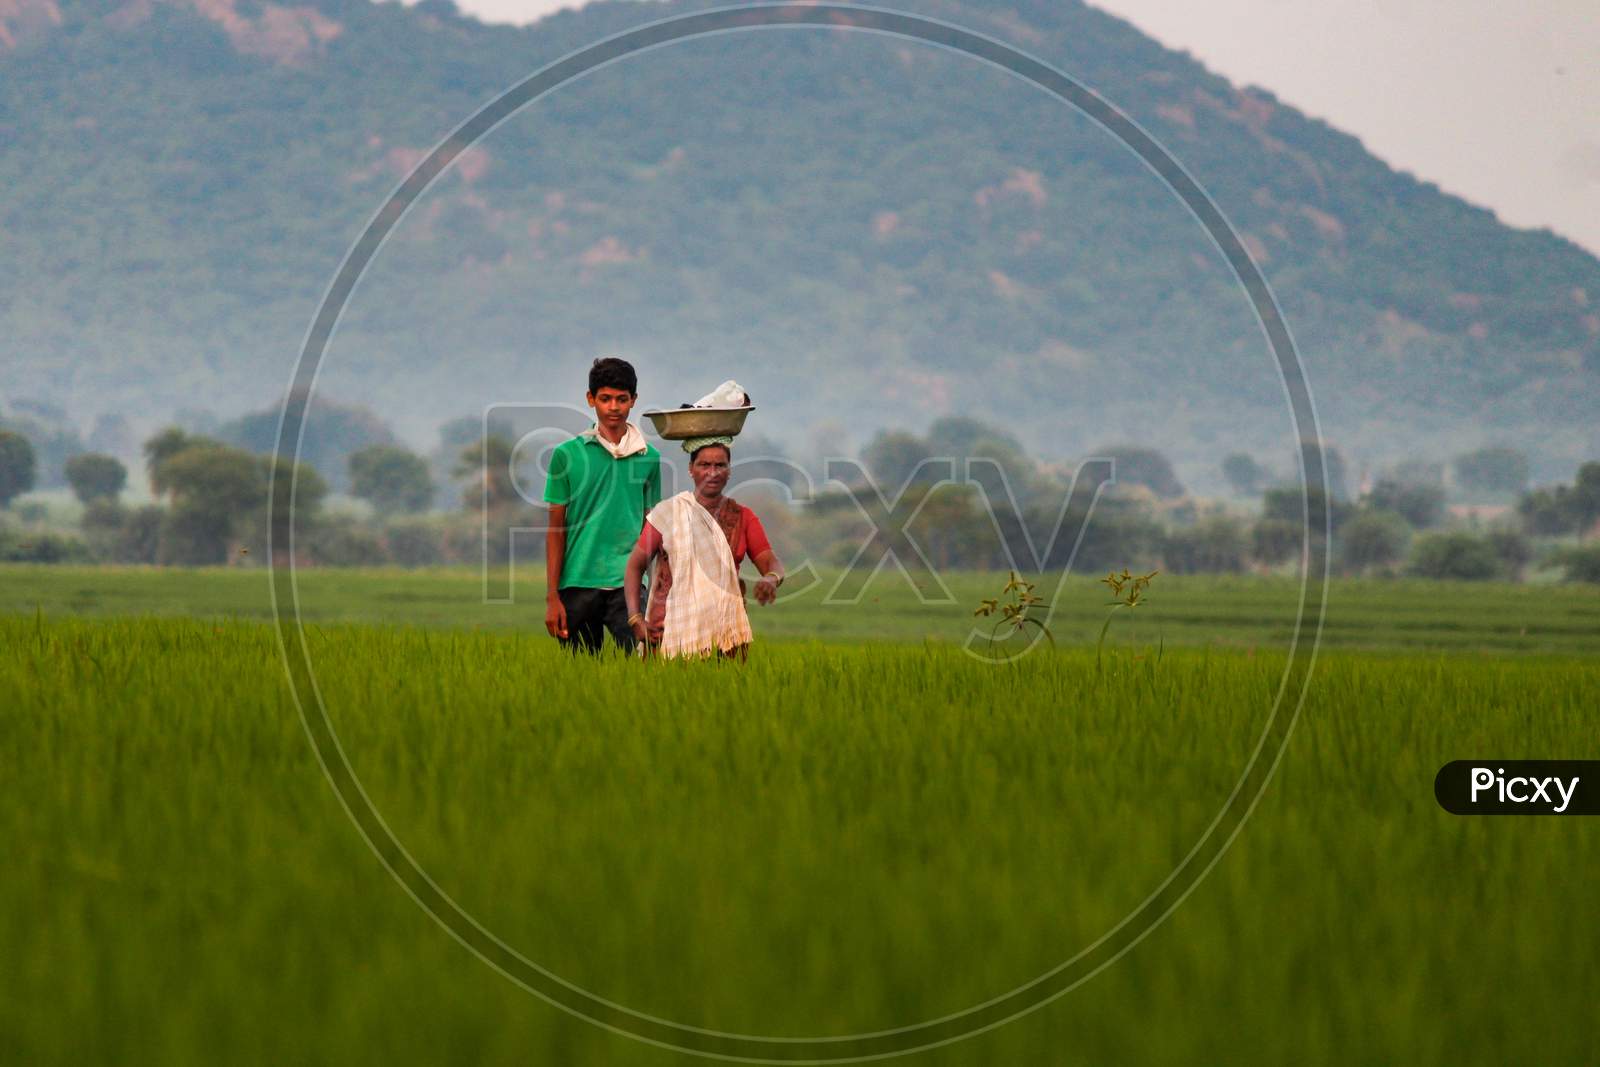 Women returning from agriculture fields after work